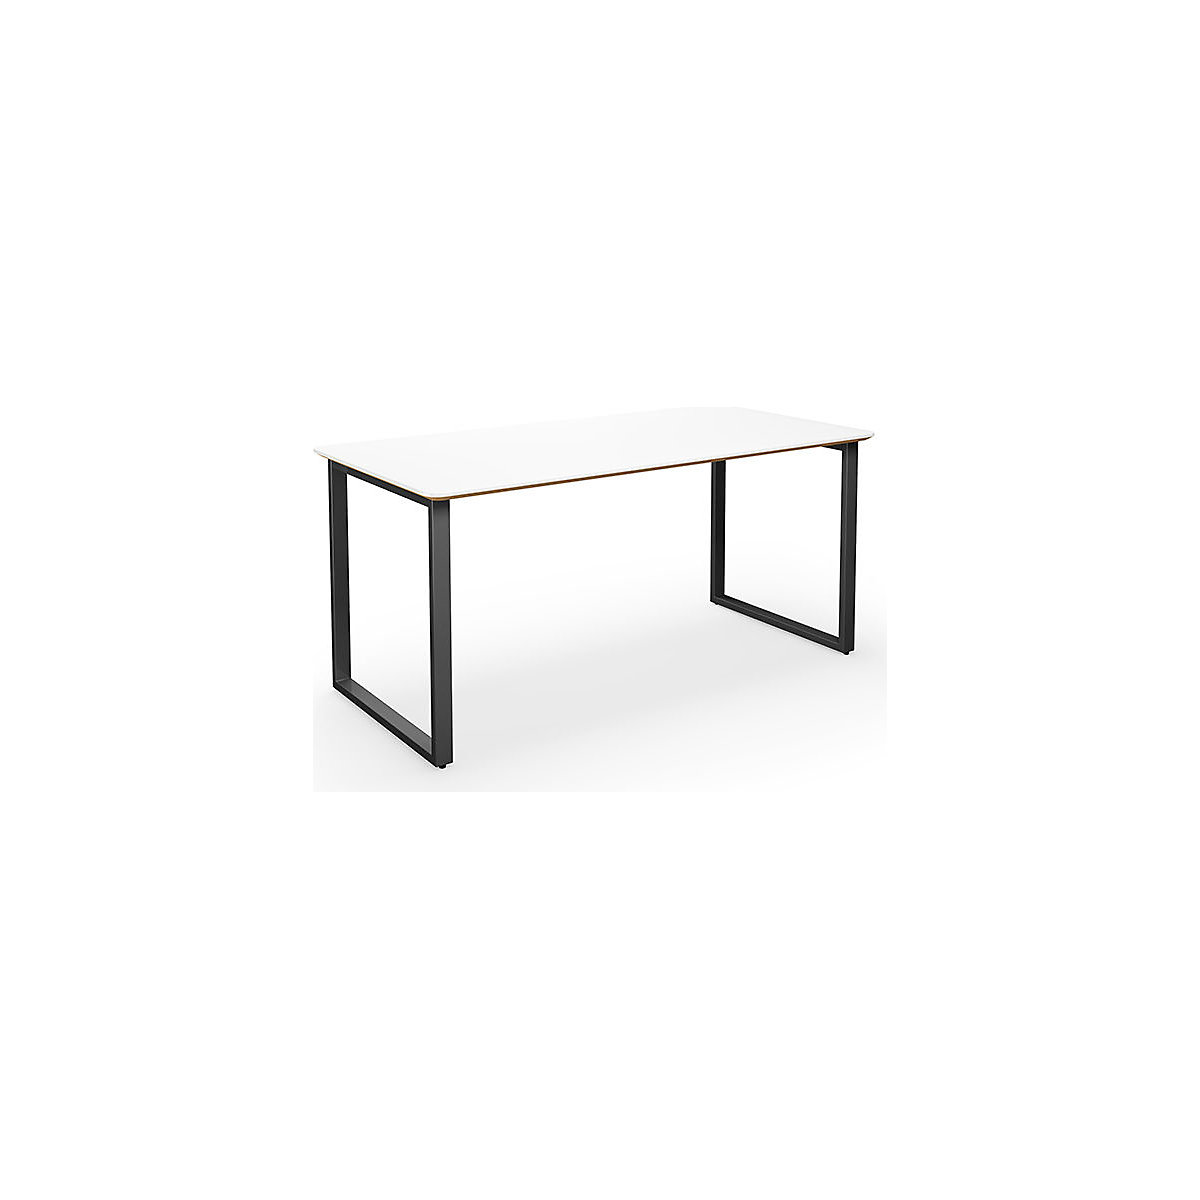 DUO-O Trend multi-purpose desk, straight tabletop, rounded corners